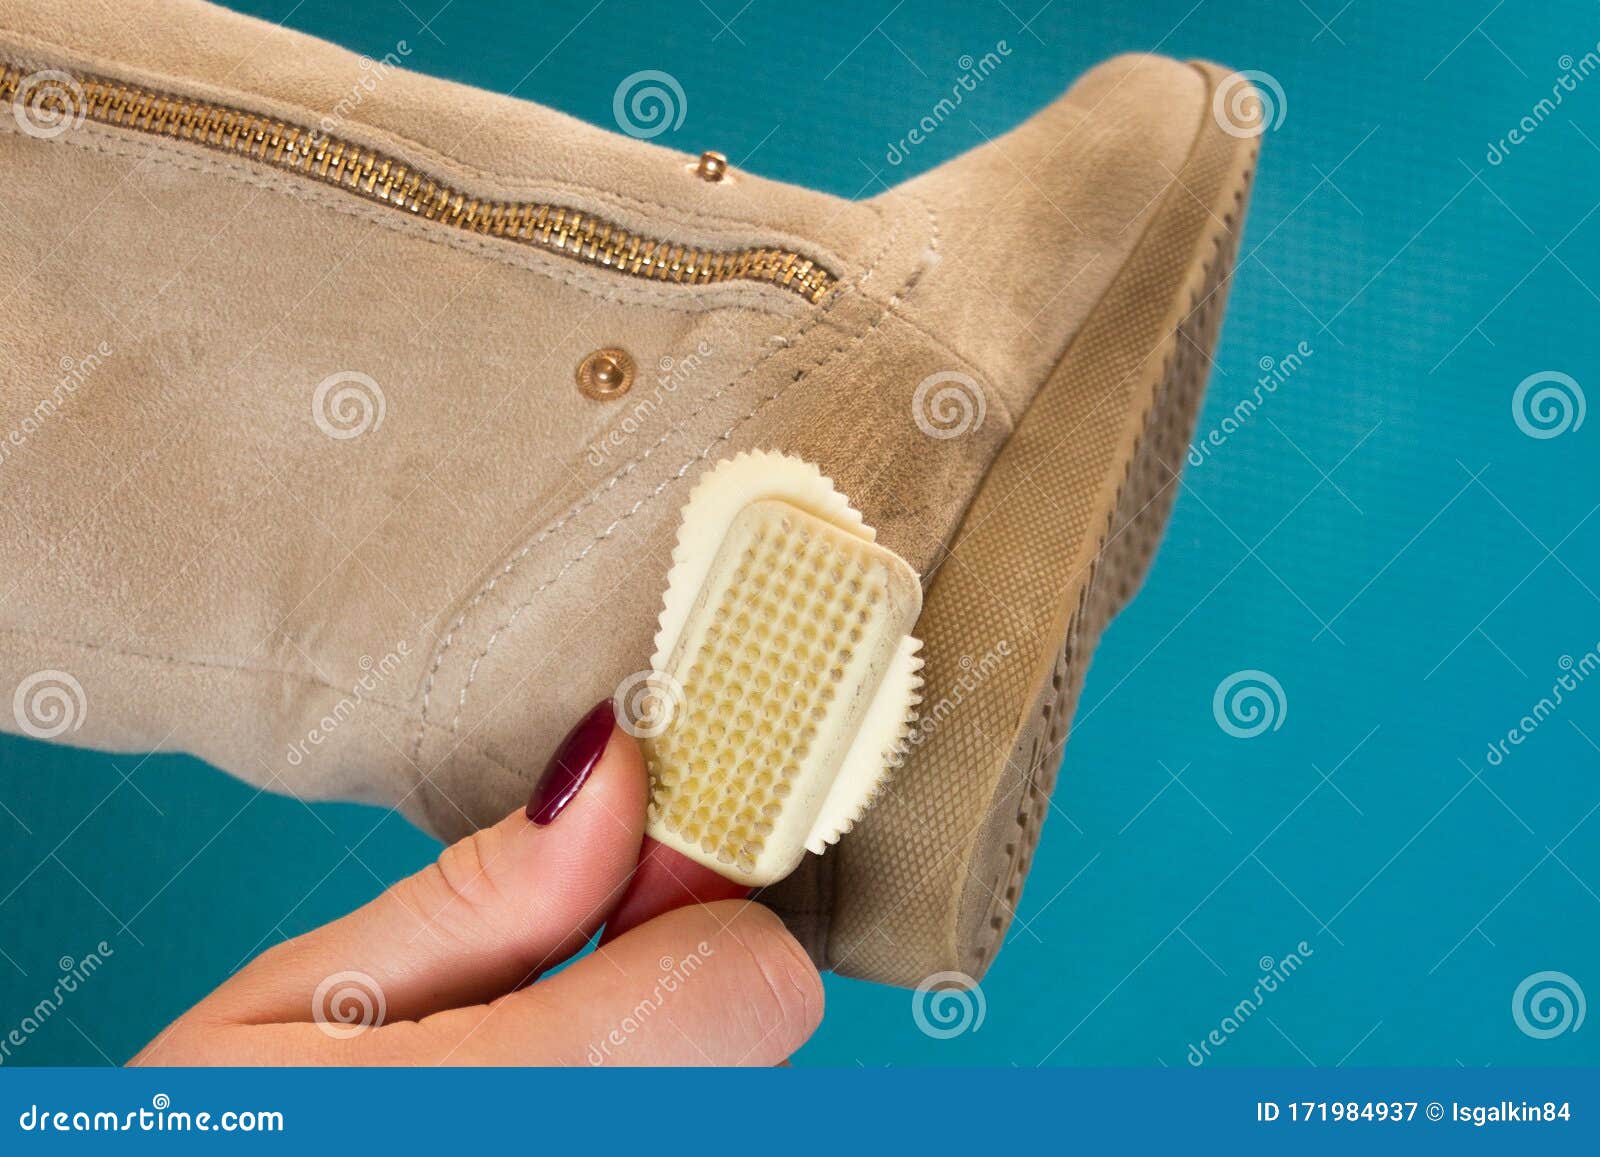 Cleaning suede boots stock image. Image of equipment - 171984937